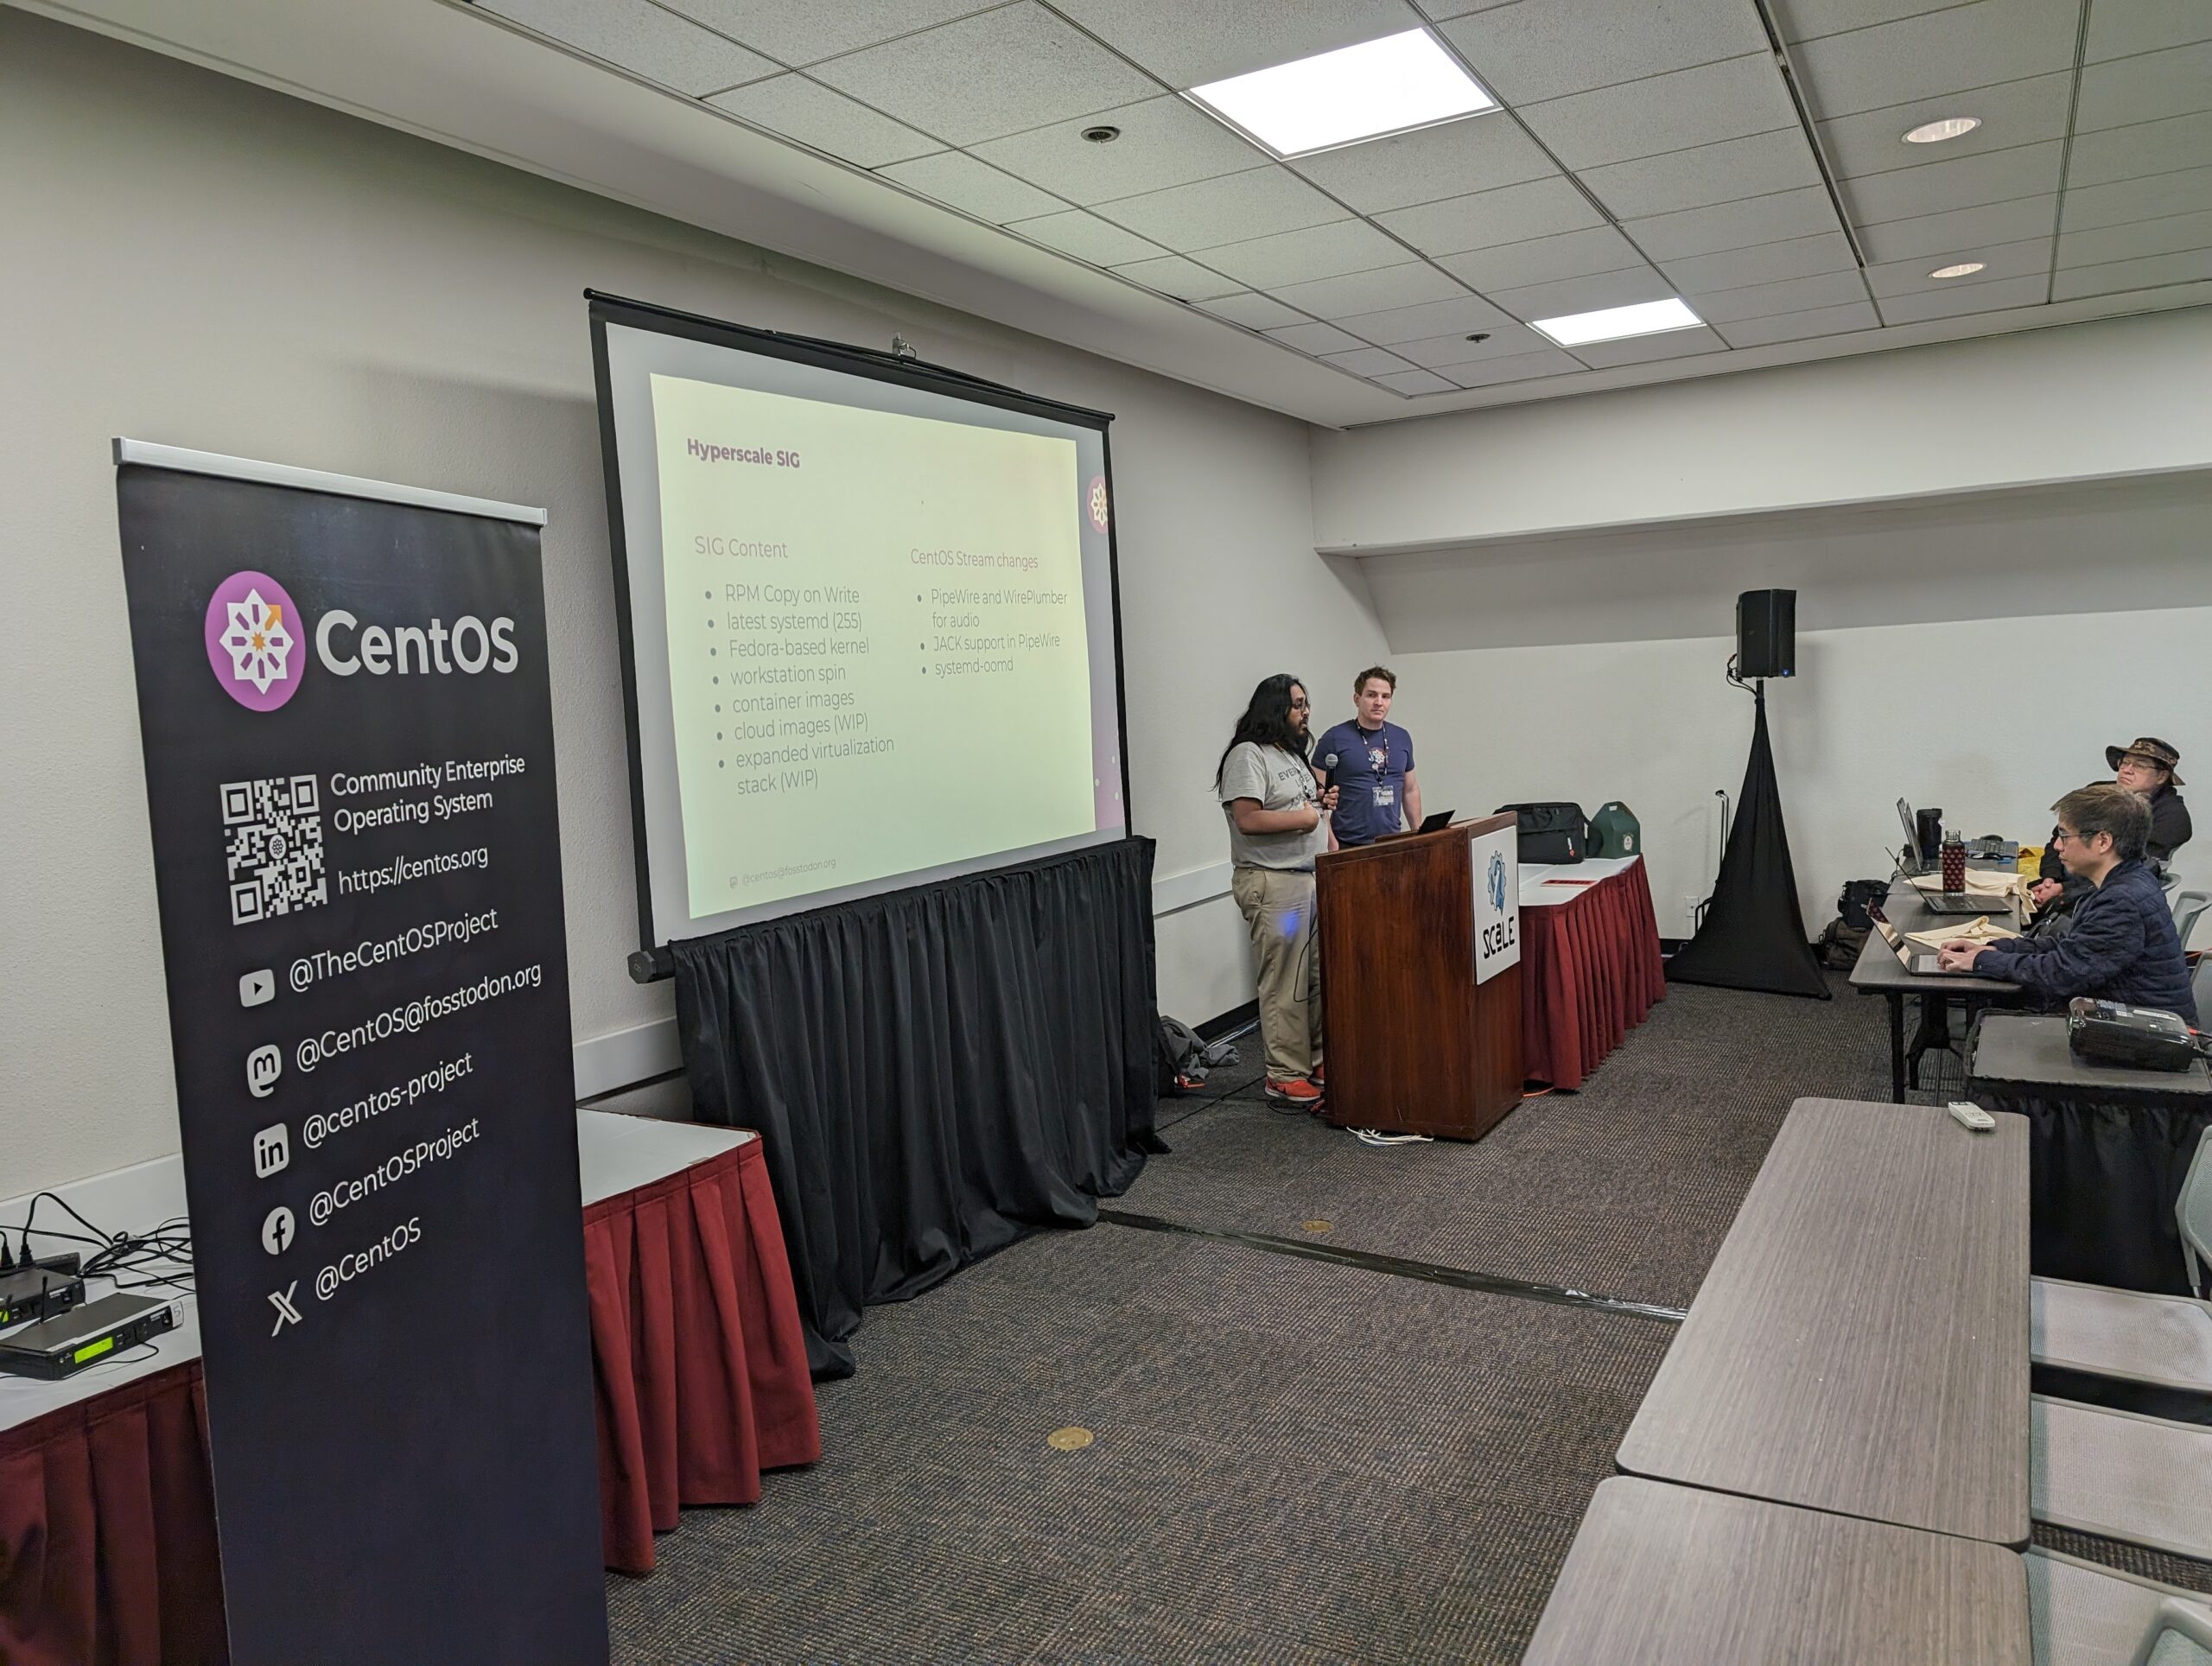 Photo of Neil Gompa, Shaun McCance at the podium presenting a kernels talk. Photo taken by Carl George.